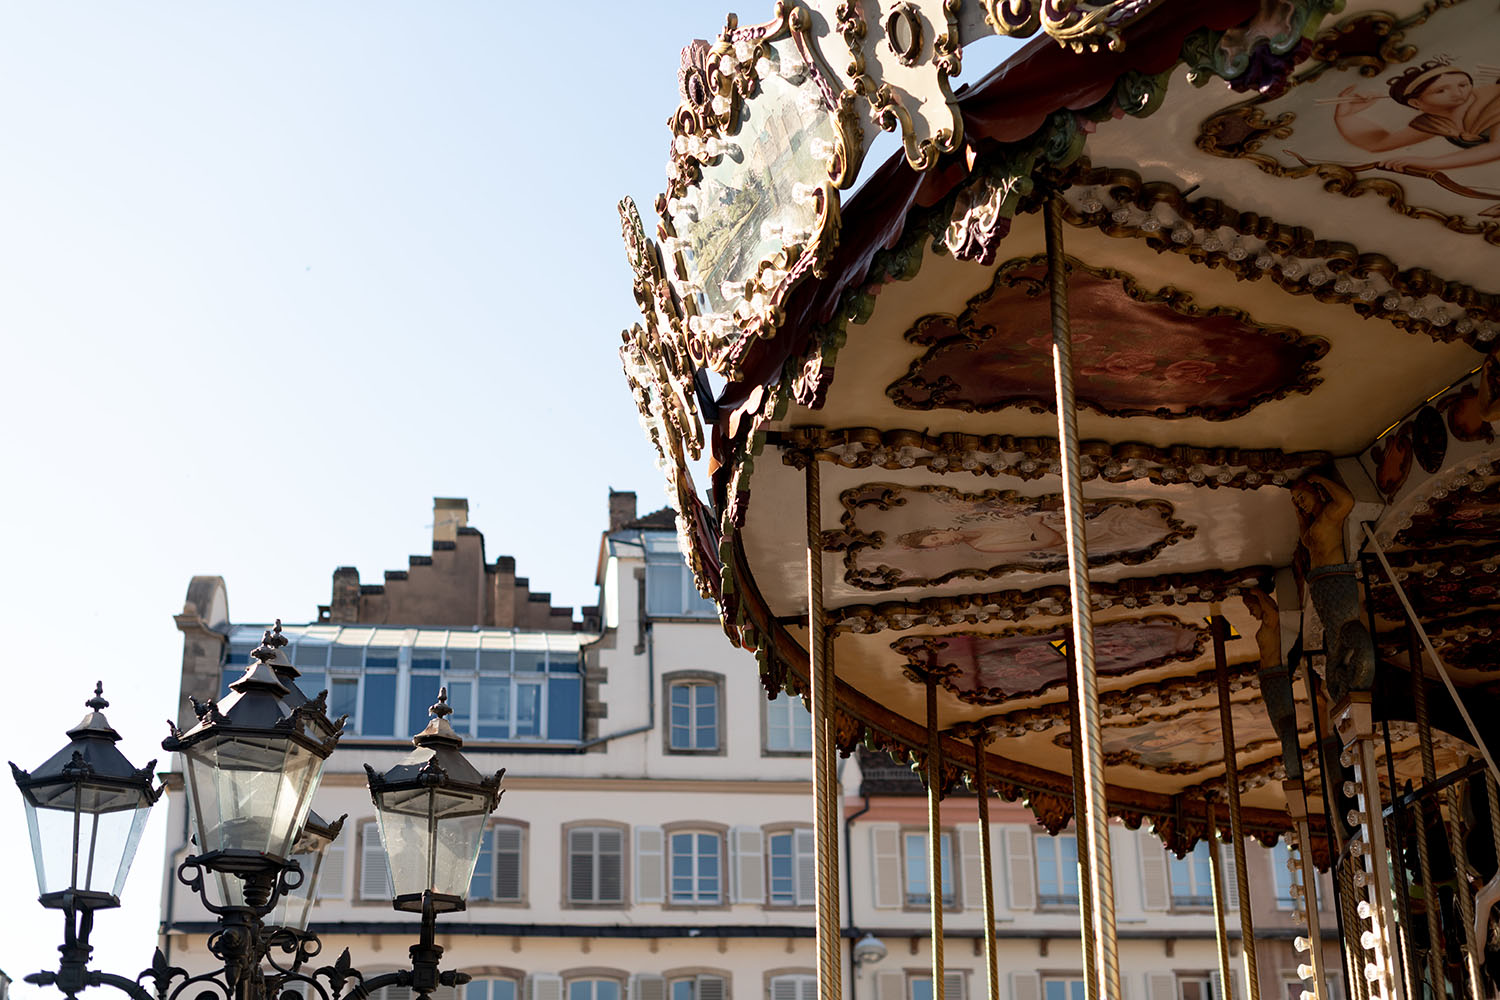 Coco & Voltaire - Carrousel 1900 in Strasbourg, France